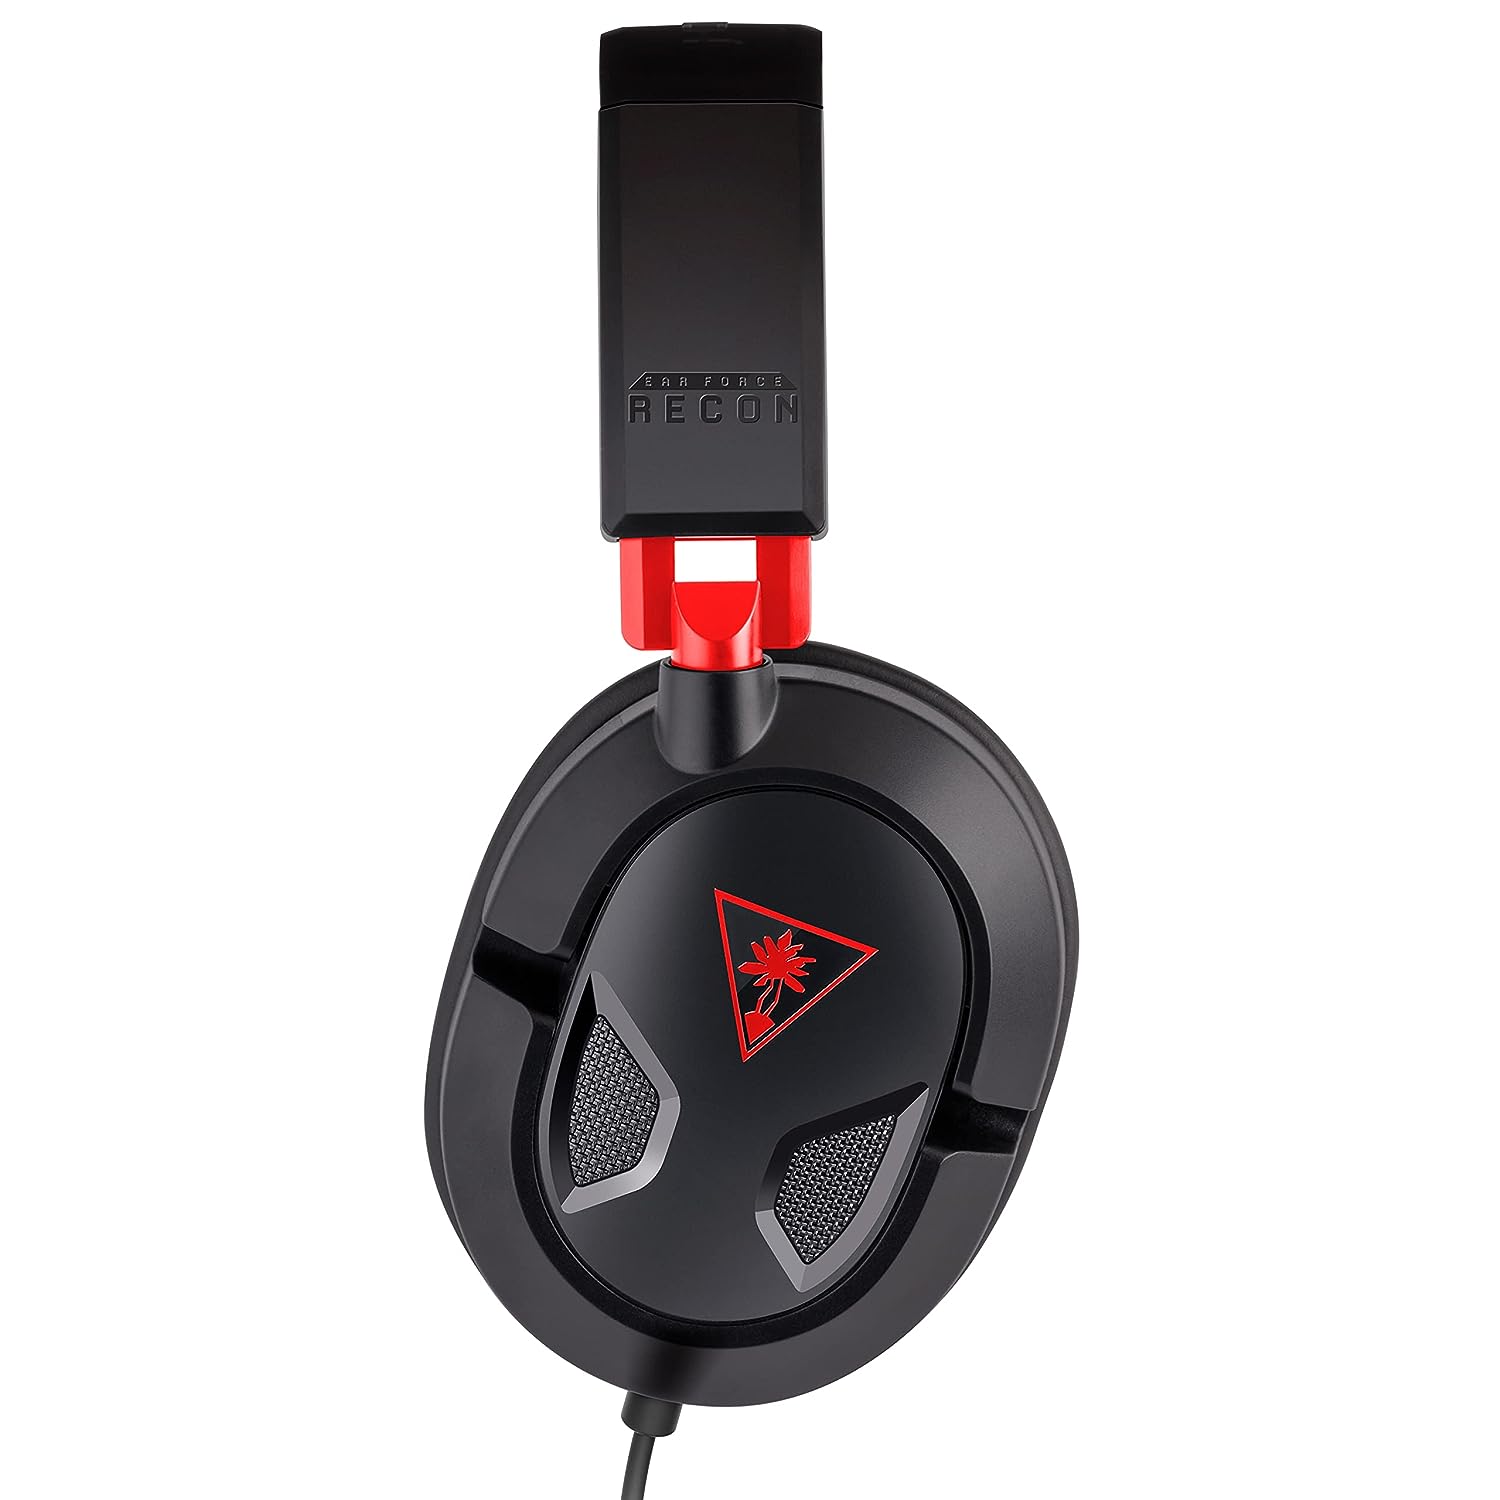 Turtle Beach Ear Force Recon 50 Gaming Headset for PlayStation 4, Xbox One, & PC/Mac - Geek Tech